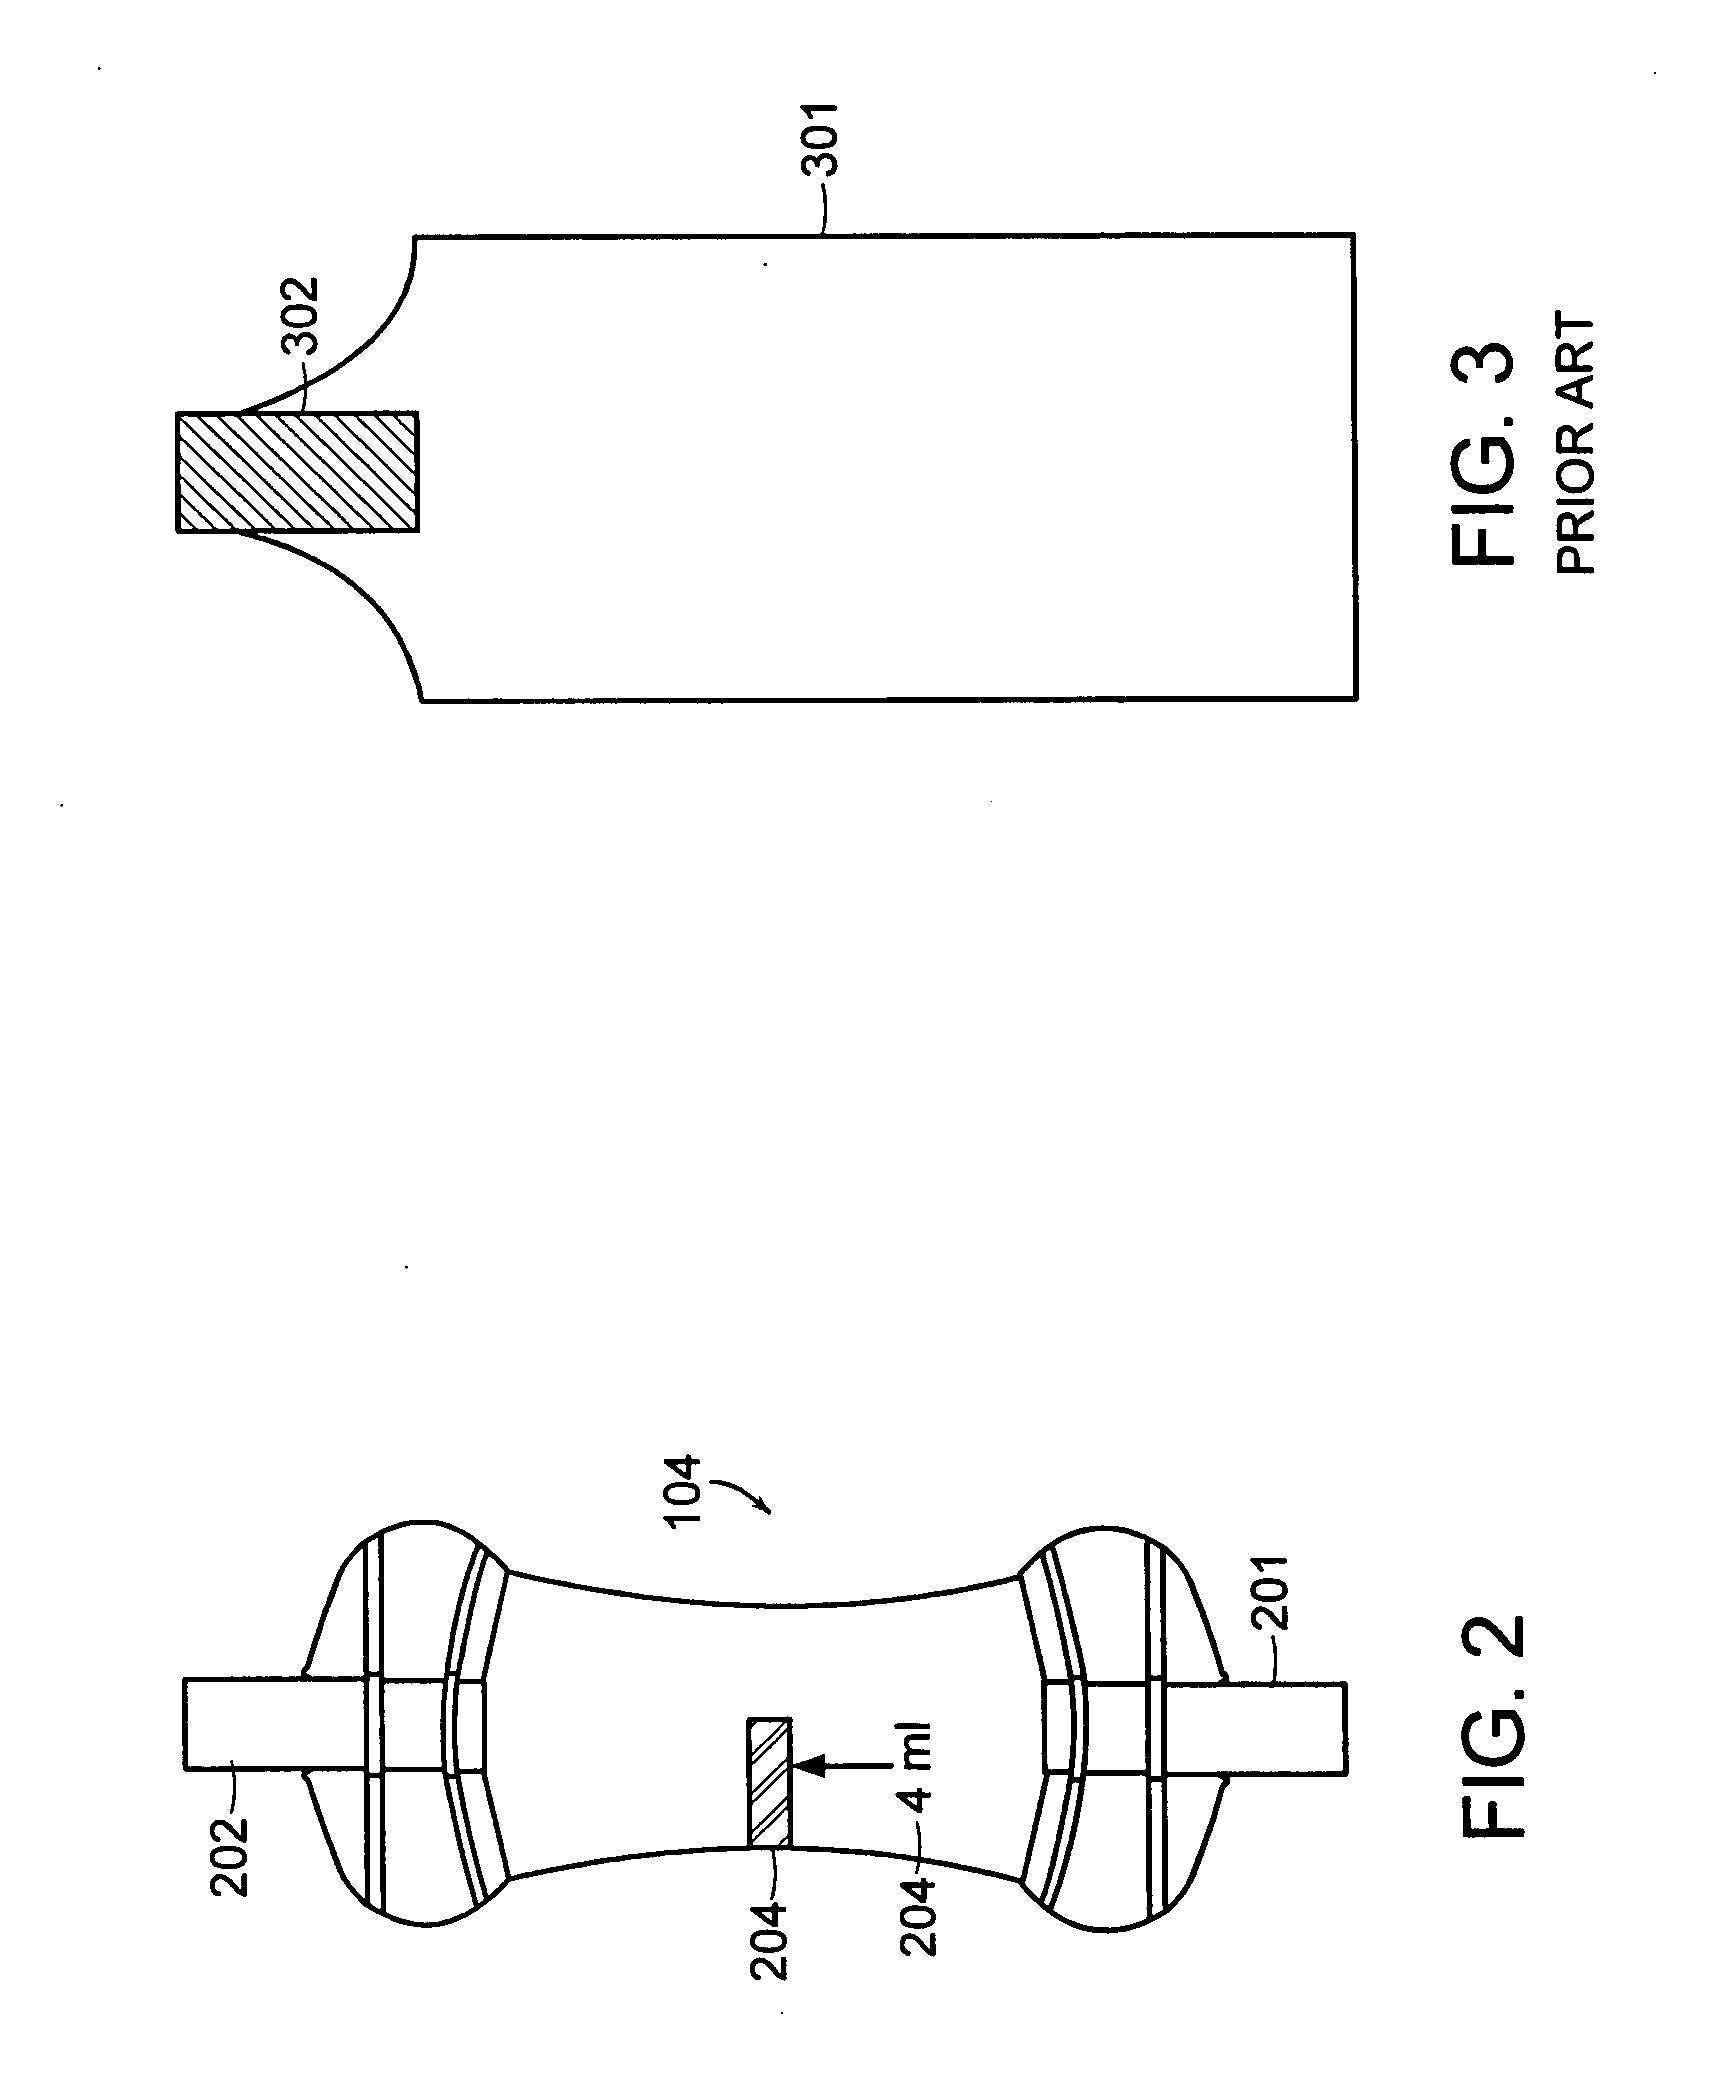 Closed method and system for the sampling and testing of fluid